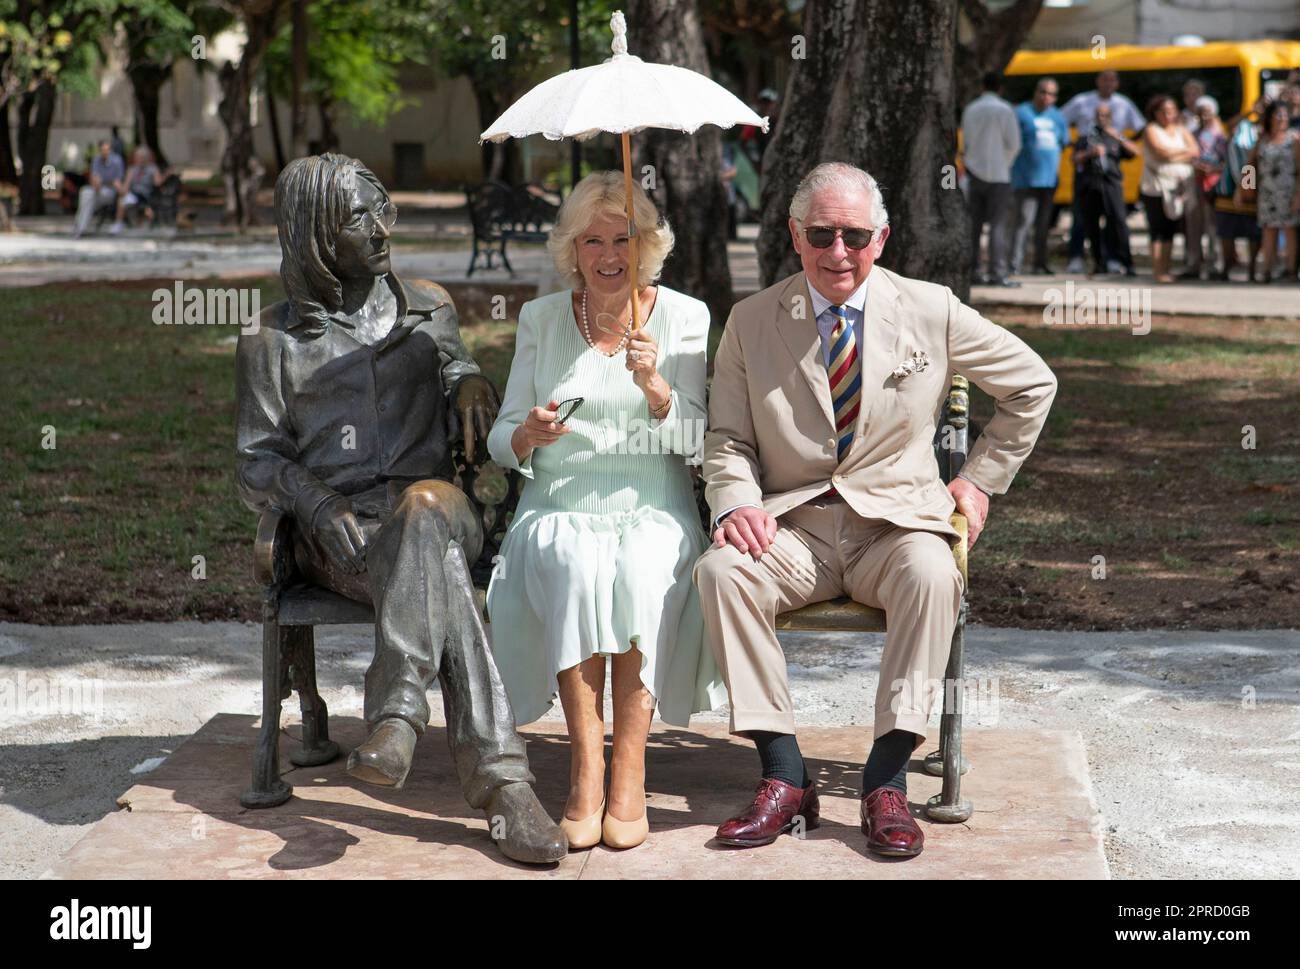 File photo dated 26/03/19 of the Prince of Wales and the Duchess of Cornwall sit on the John Lennon memorial bench in John Lennon Square in Havana, Cuba, as part of an historic trip which celebrates cultural ties between the UK and the Communist state. Photos from every year of the King's life have been compiled by the PA news agency, to celebrate Charles III's coronation. Issue date: Thursday April 27, 2023. Stock Photo